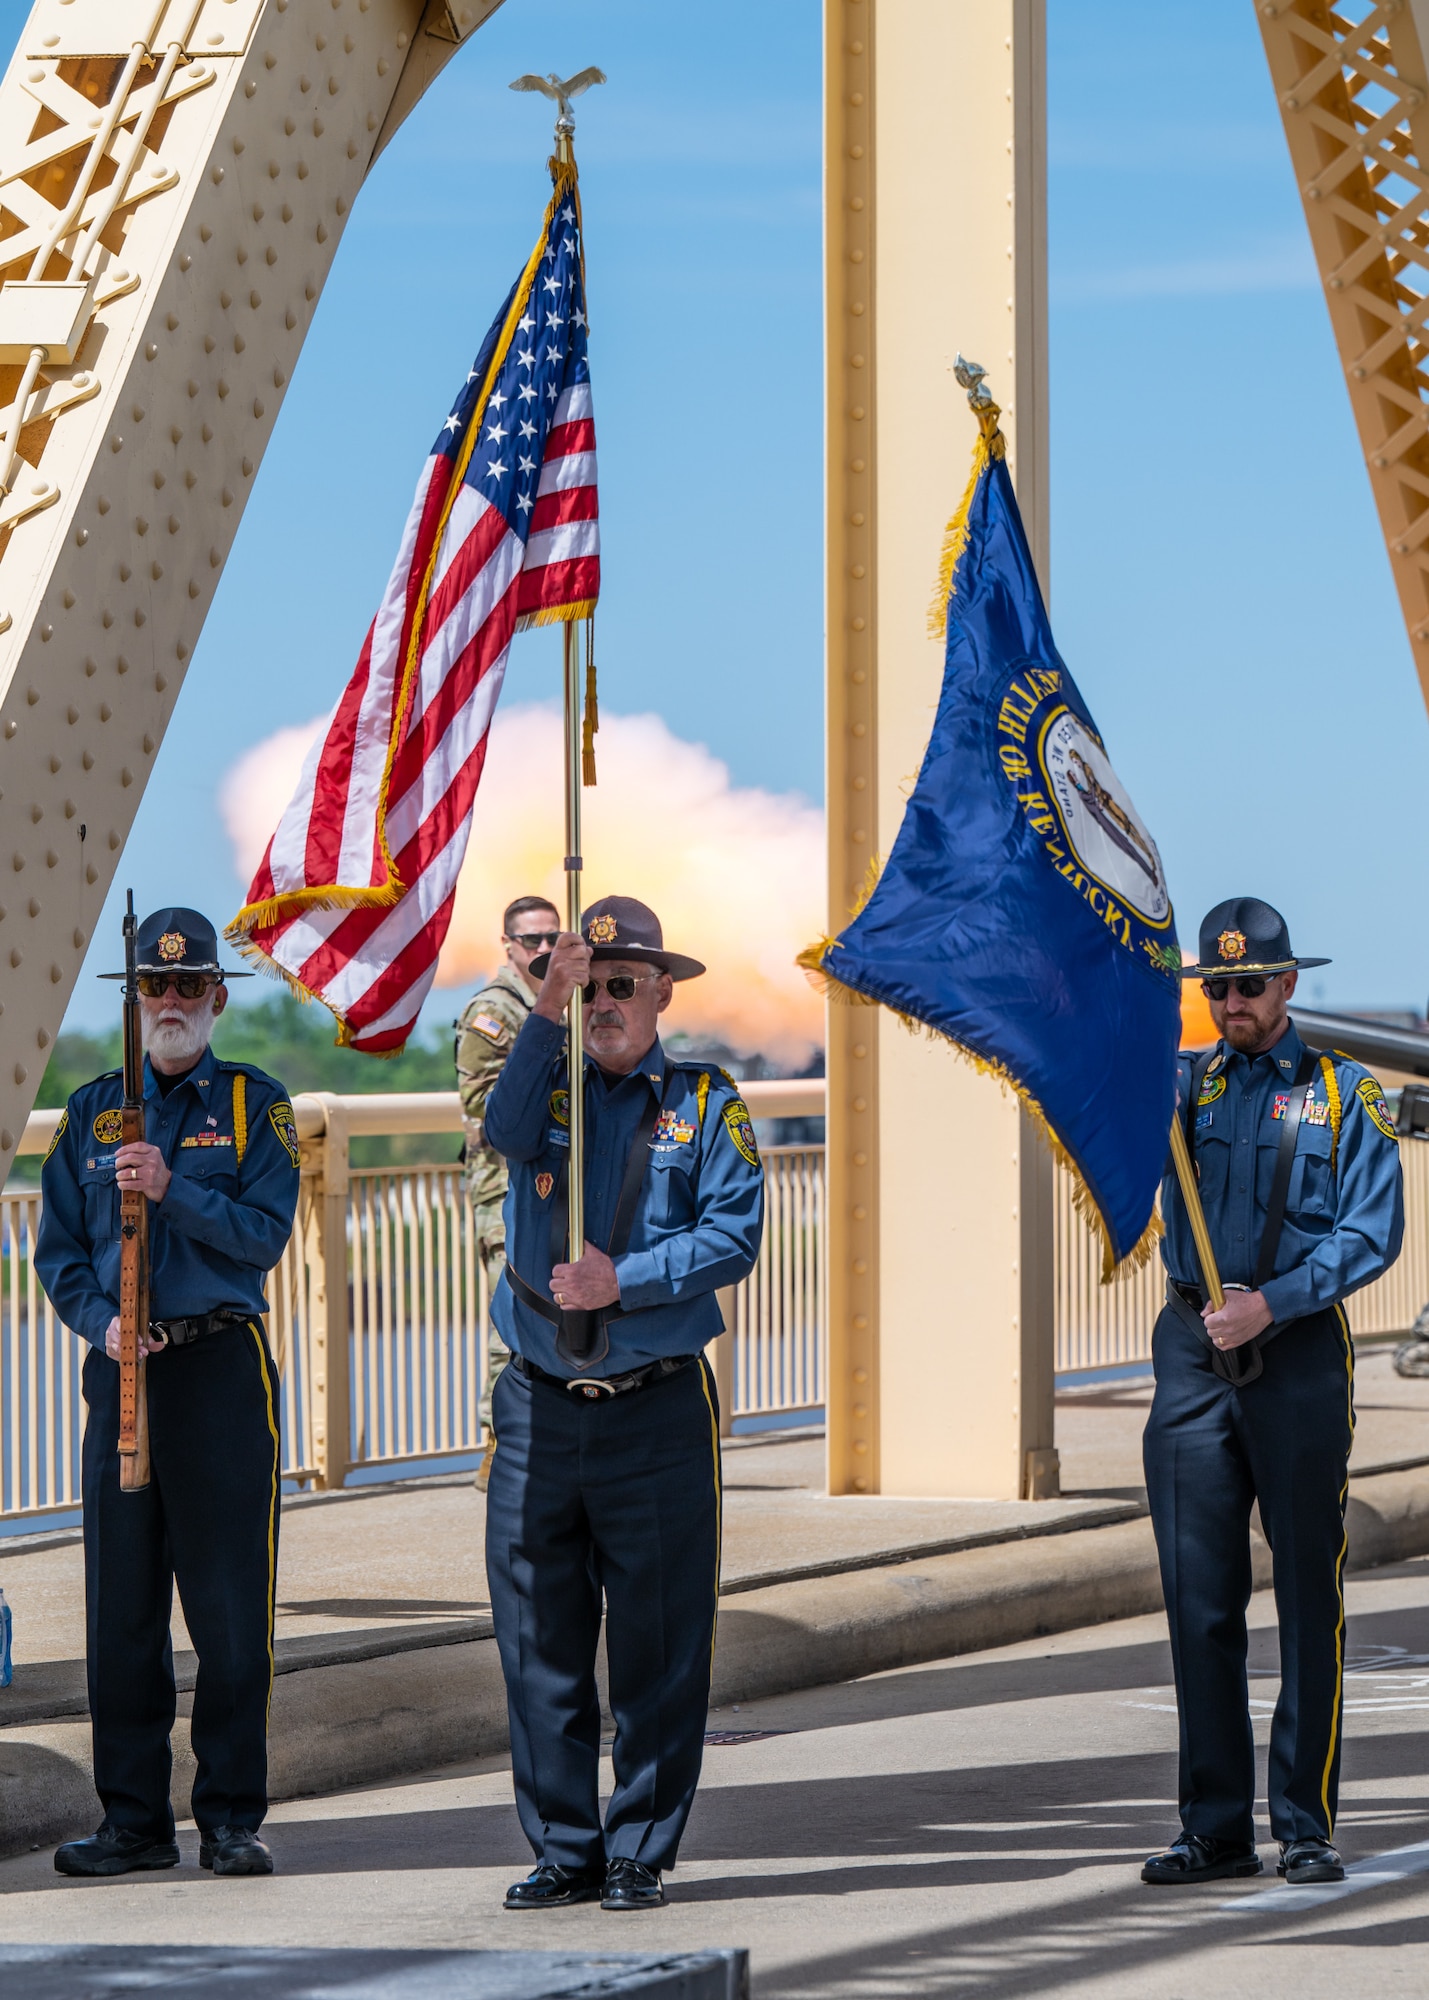 Members of the Veterans of Foreign Wars Post 1170 Honor Guard Team present the colors as canons fire behind them to kick off the Thunder Over Louisville air show in Louisville, Ky., April 20, 2024. This year’s event featured more than two-dozen military and civilian planes, including the Kentucky Air National Guard’s C130J Super Hercules. (U.S. Air National Guard photo by Dale Greer)